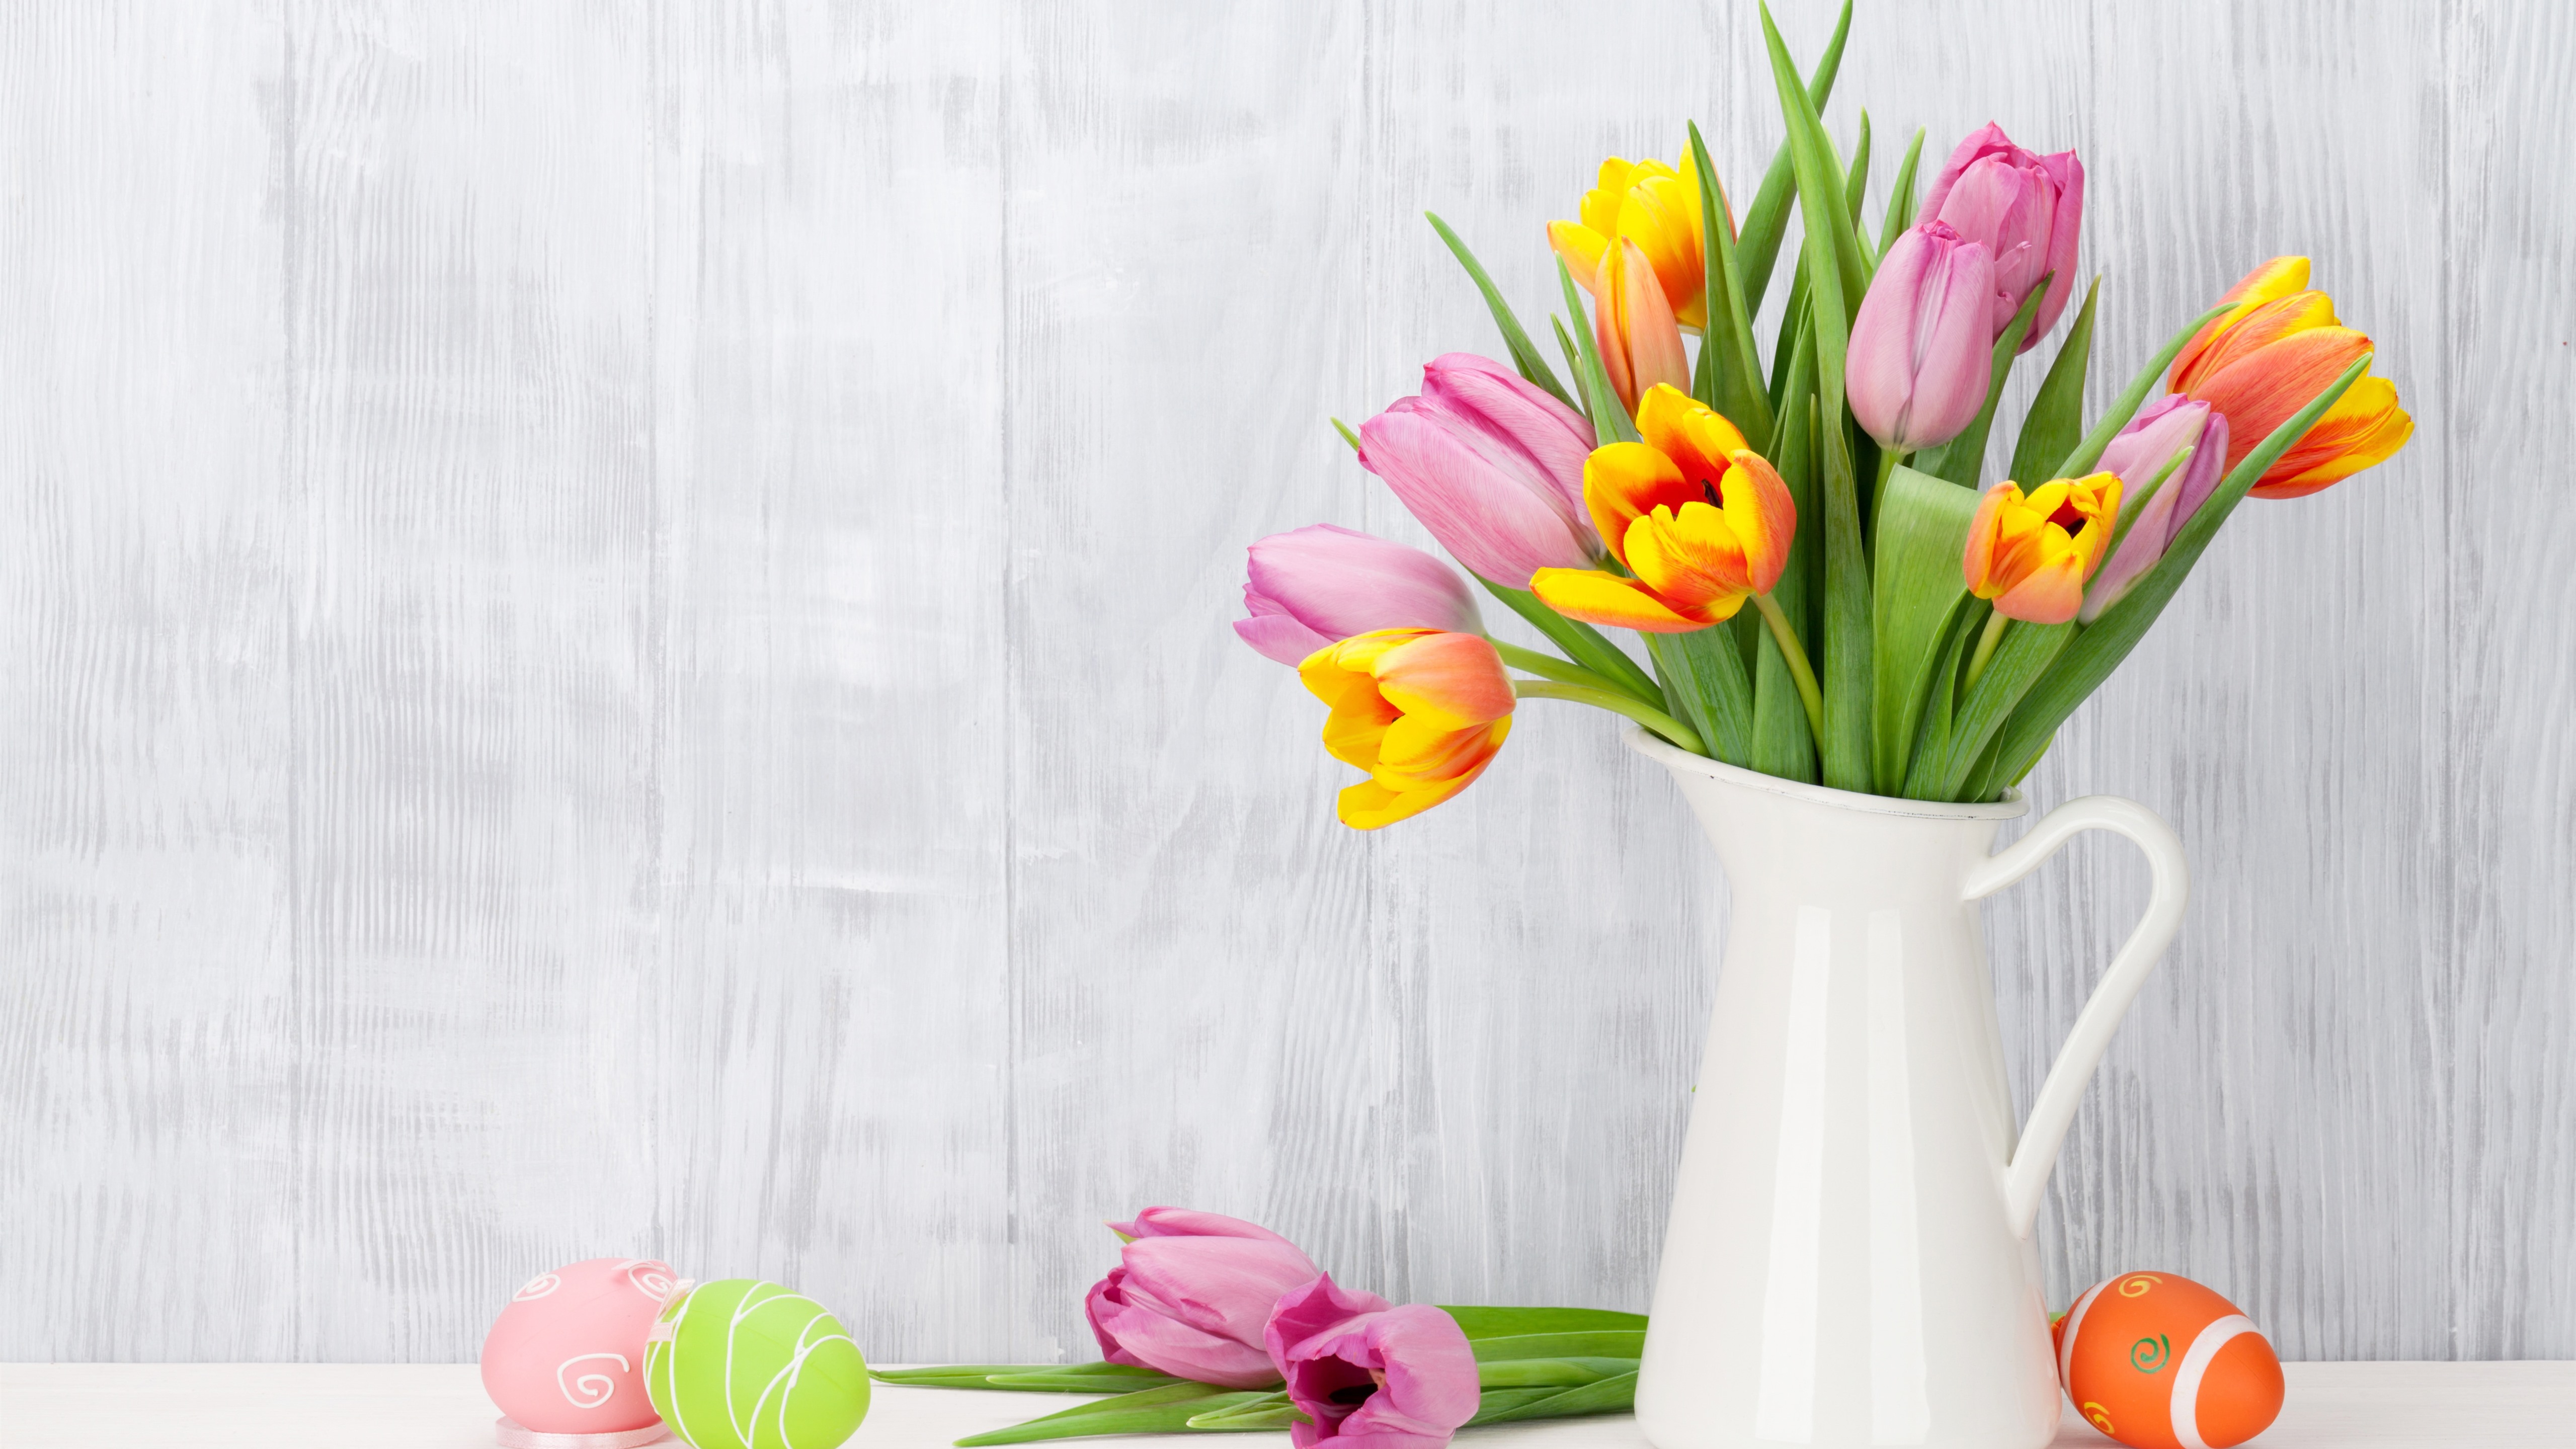 Wallpaper Pink and orange tulips, vase, Easter eggs 5120x2880 UHD 5K Picture, Image